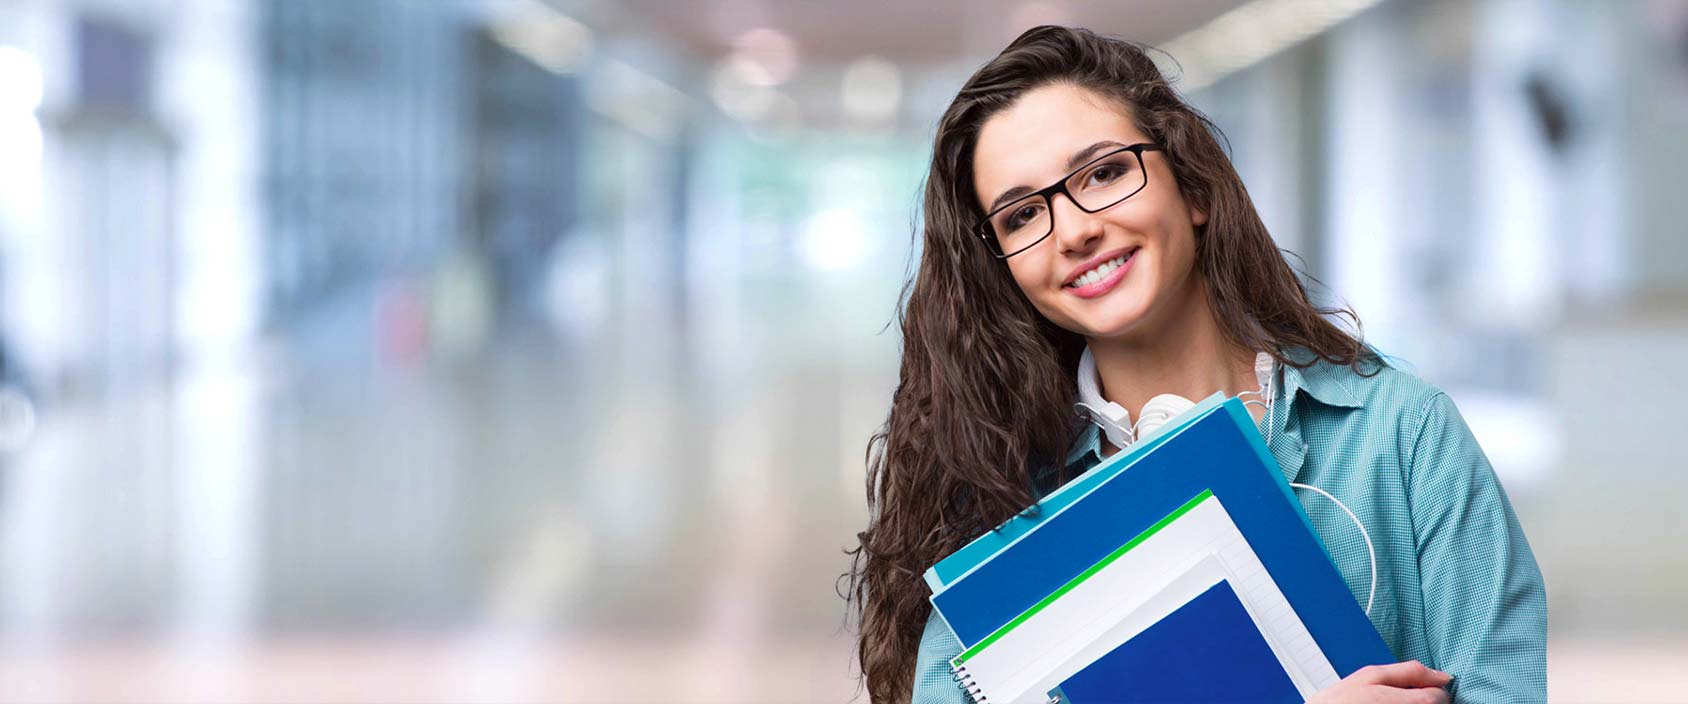 mba admission in bangalore